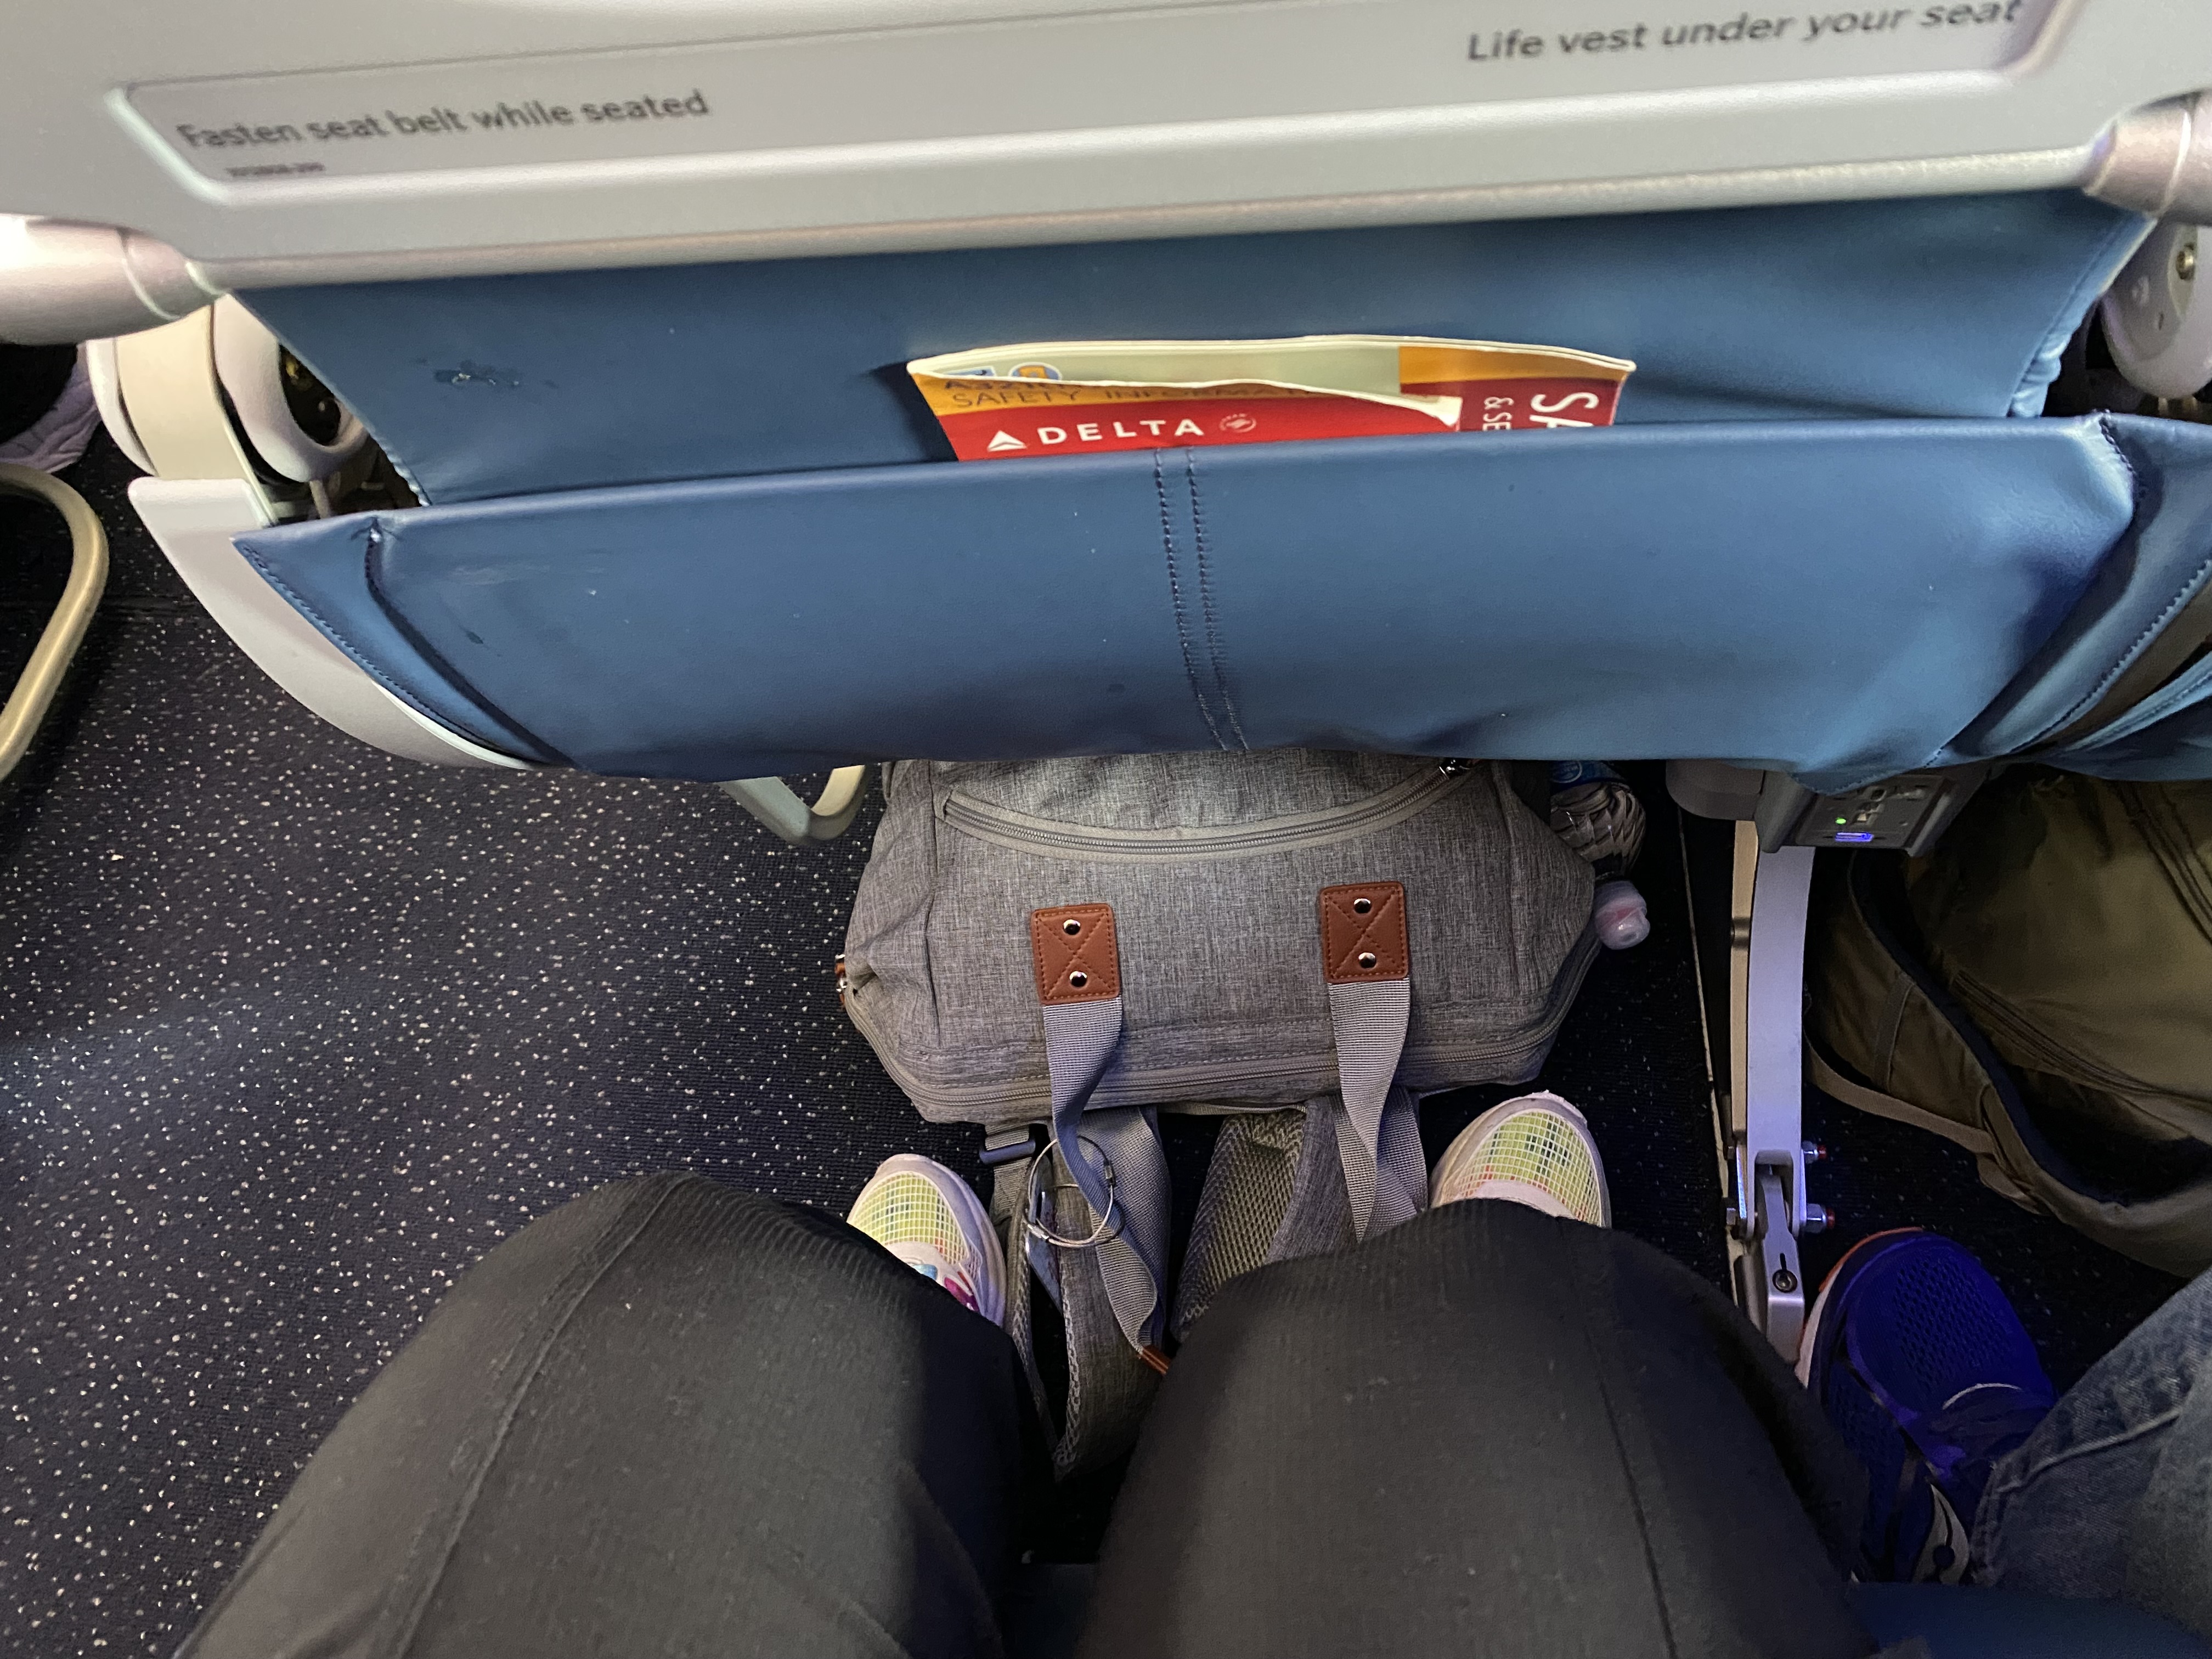 a person's legs and a bag in the seat of an airplane